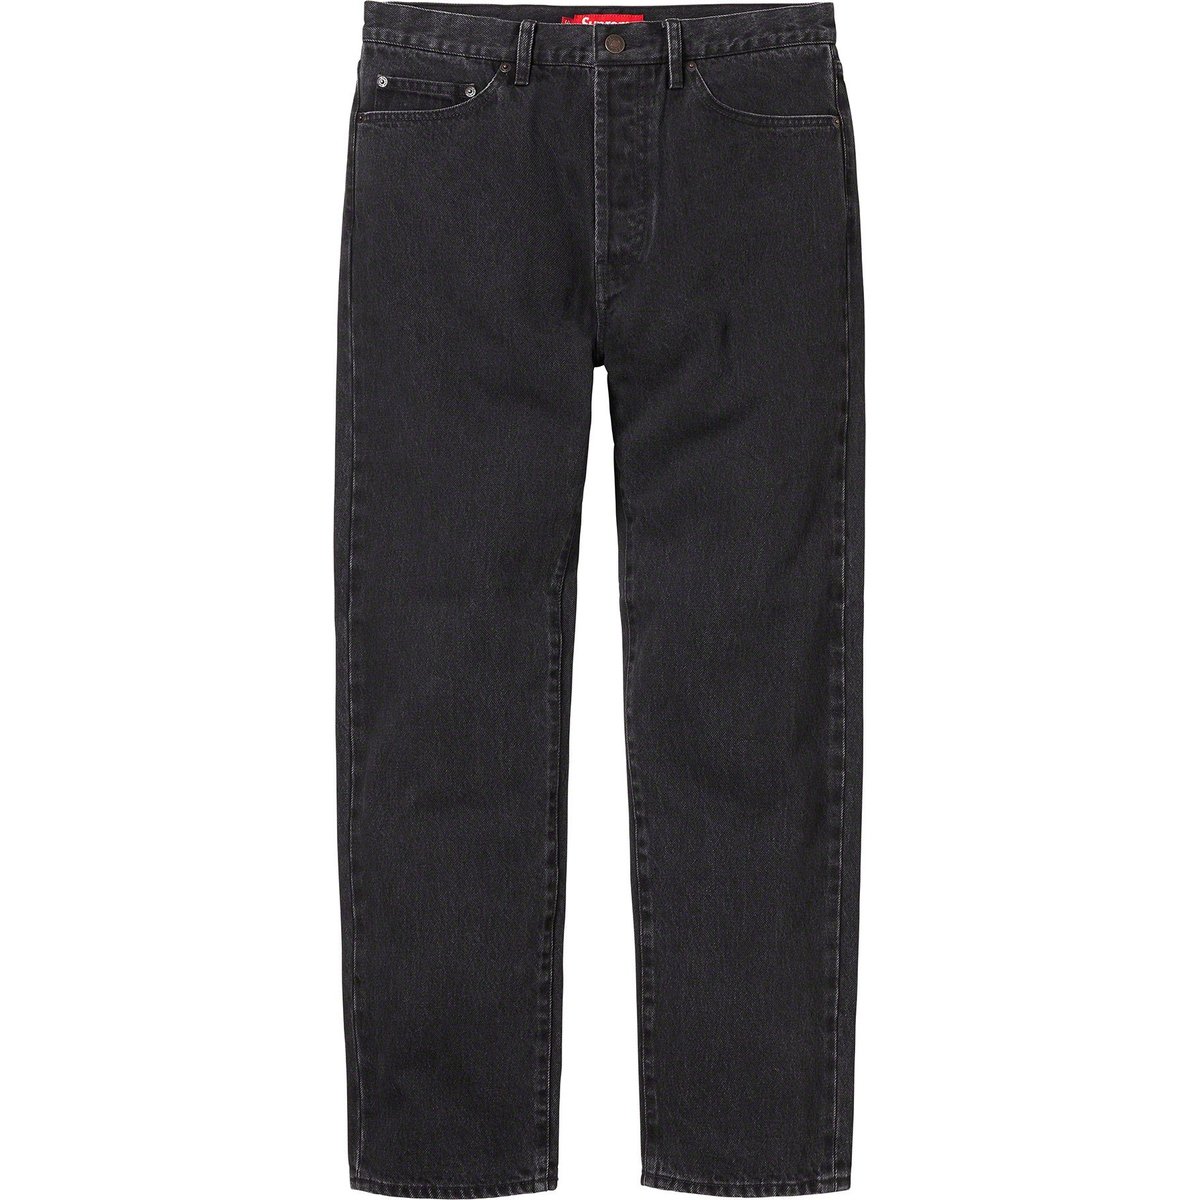 Supreme Stone Washed Black Slim Jean released during fall winter 23 season